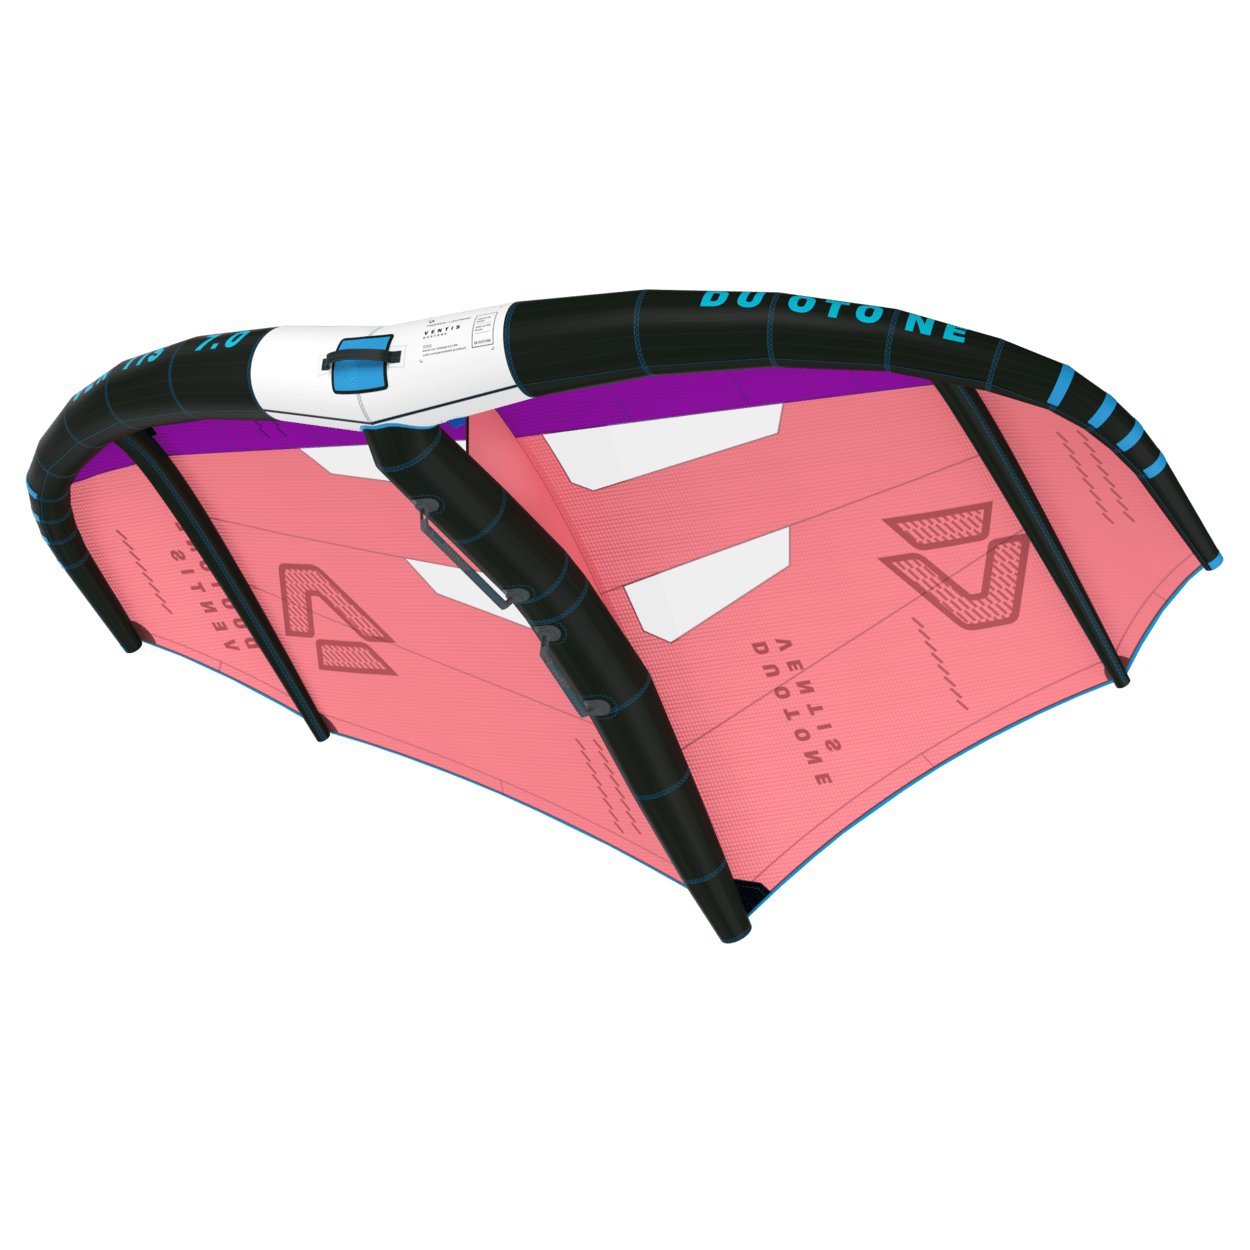 Duotone Foil Wing Ventis 2024 - Worthing Watersports - 9010583183244 - Foilwing - Duotone X